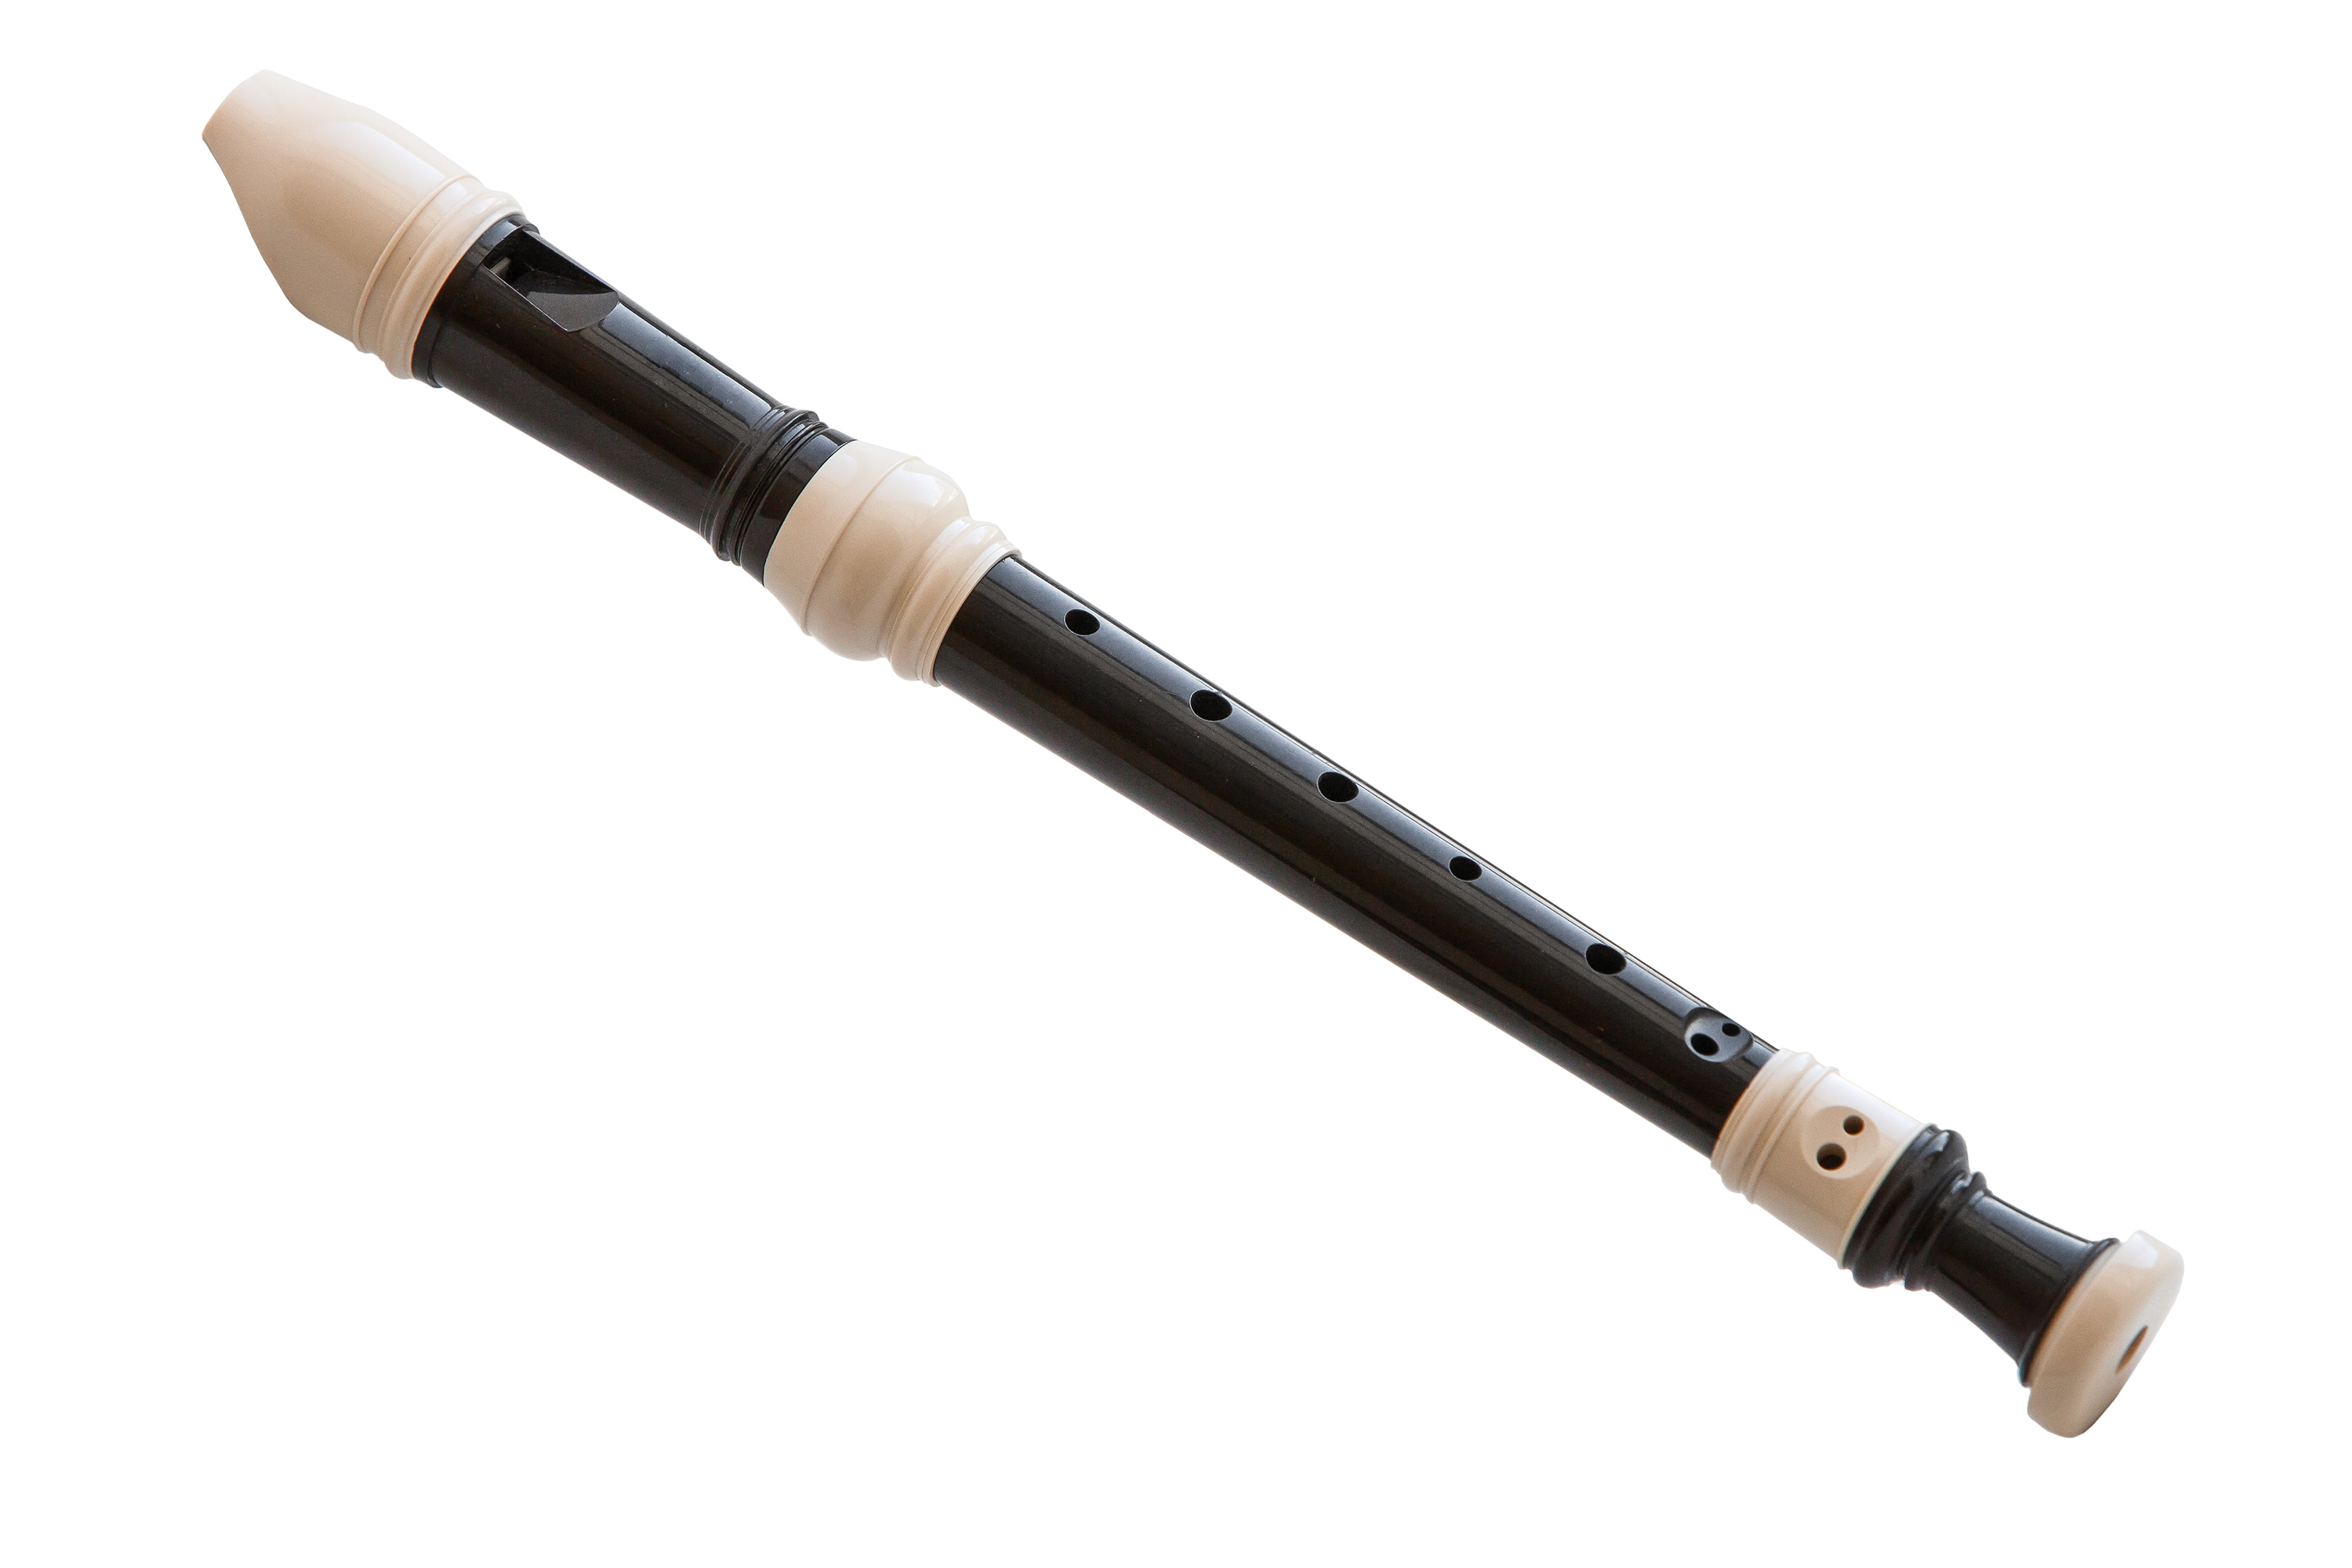 A black and white recorder instrument | Source: Shutterstock